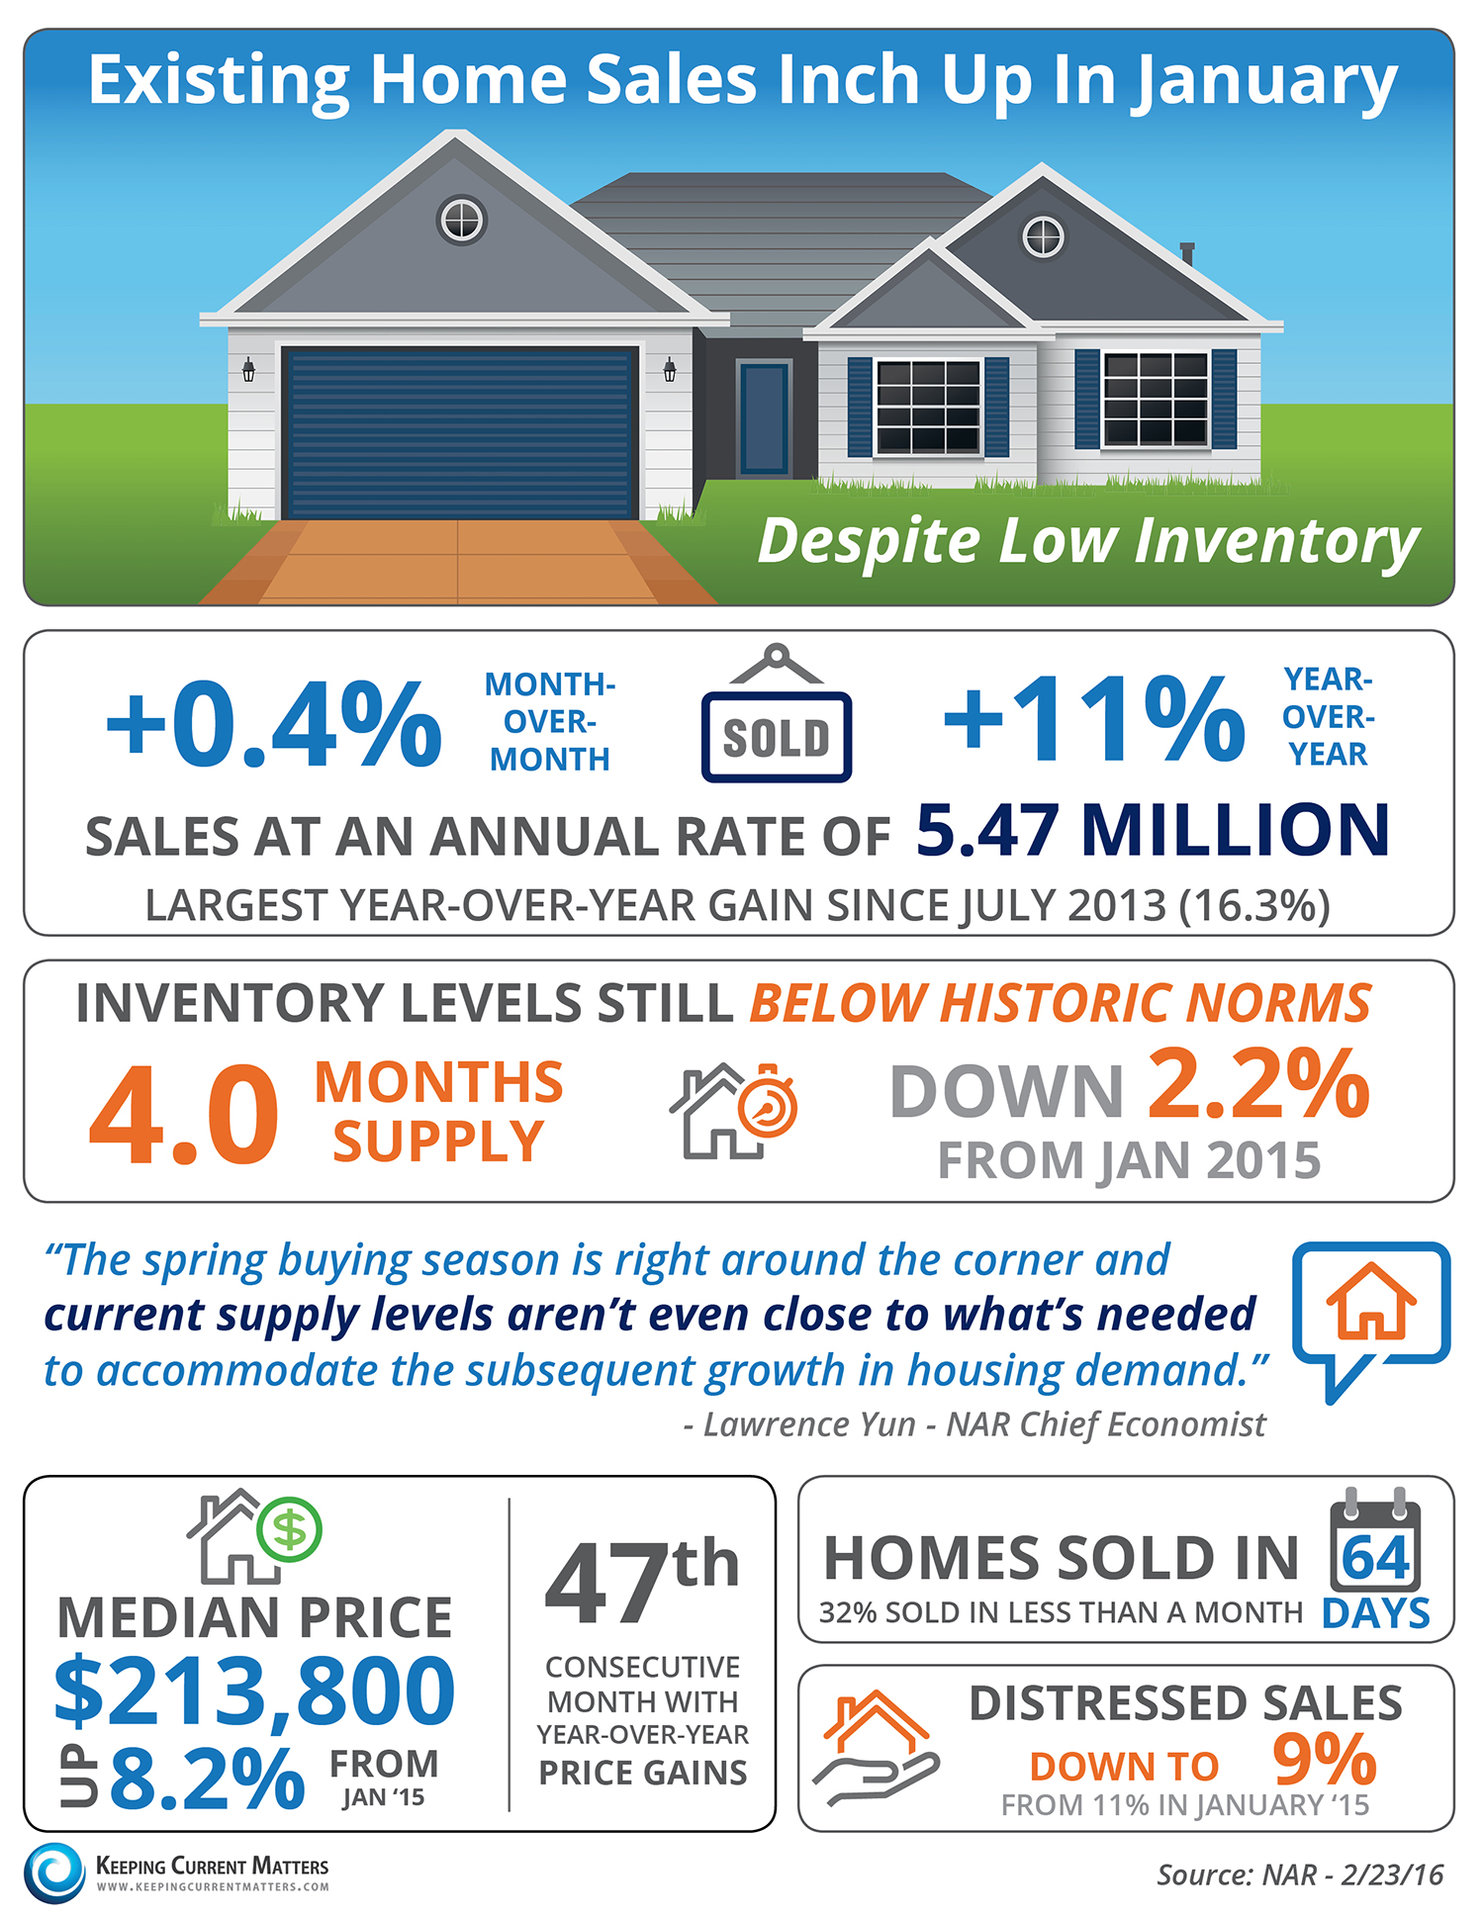 Exising Home Sales Inch Up In January [INFOGRAPHIC] | Keeping Current Matters